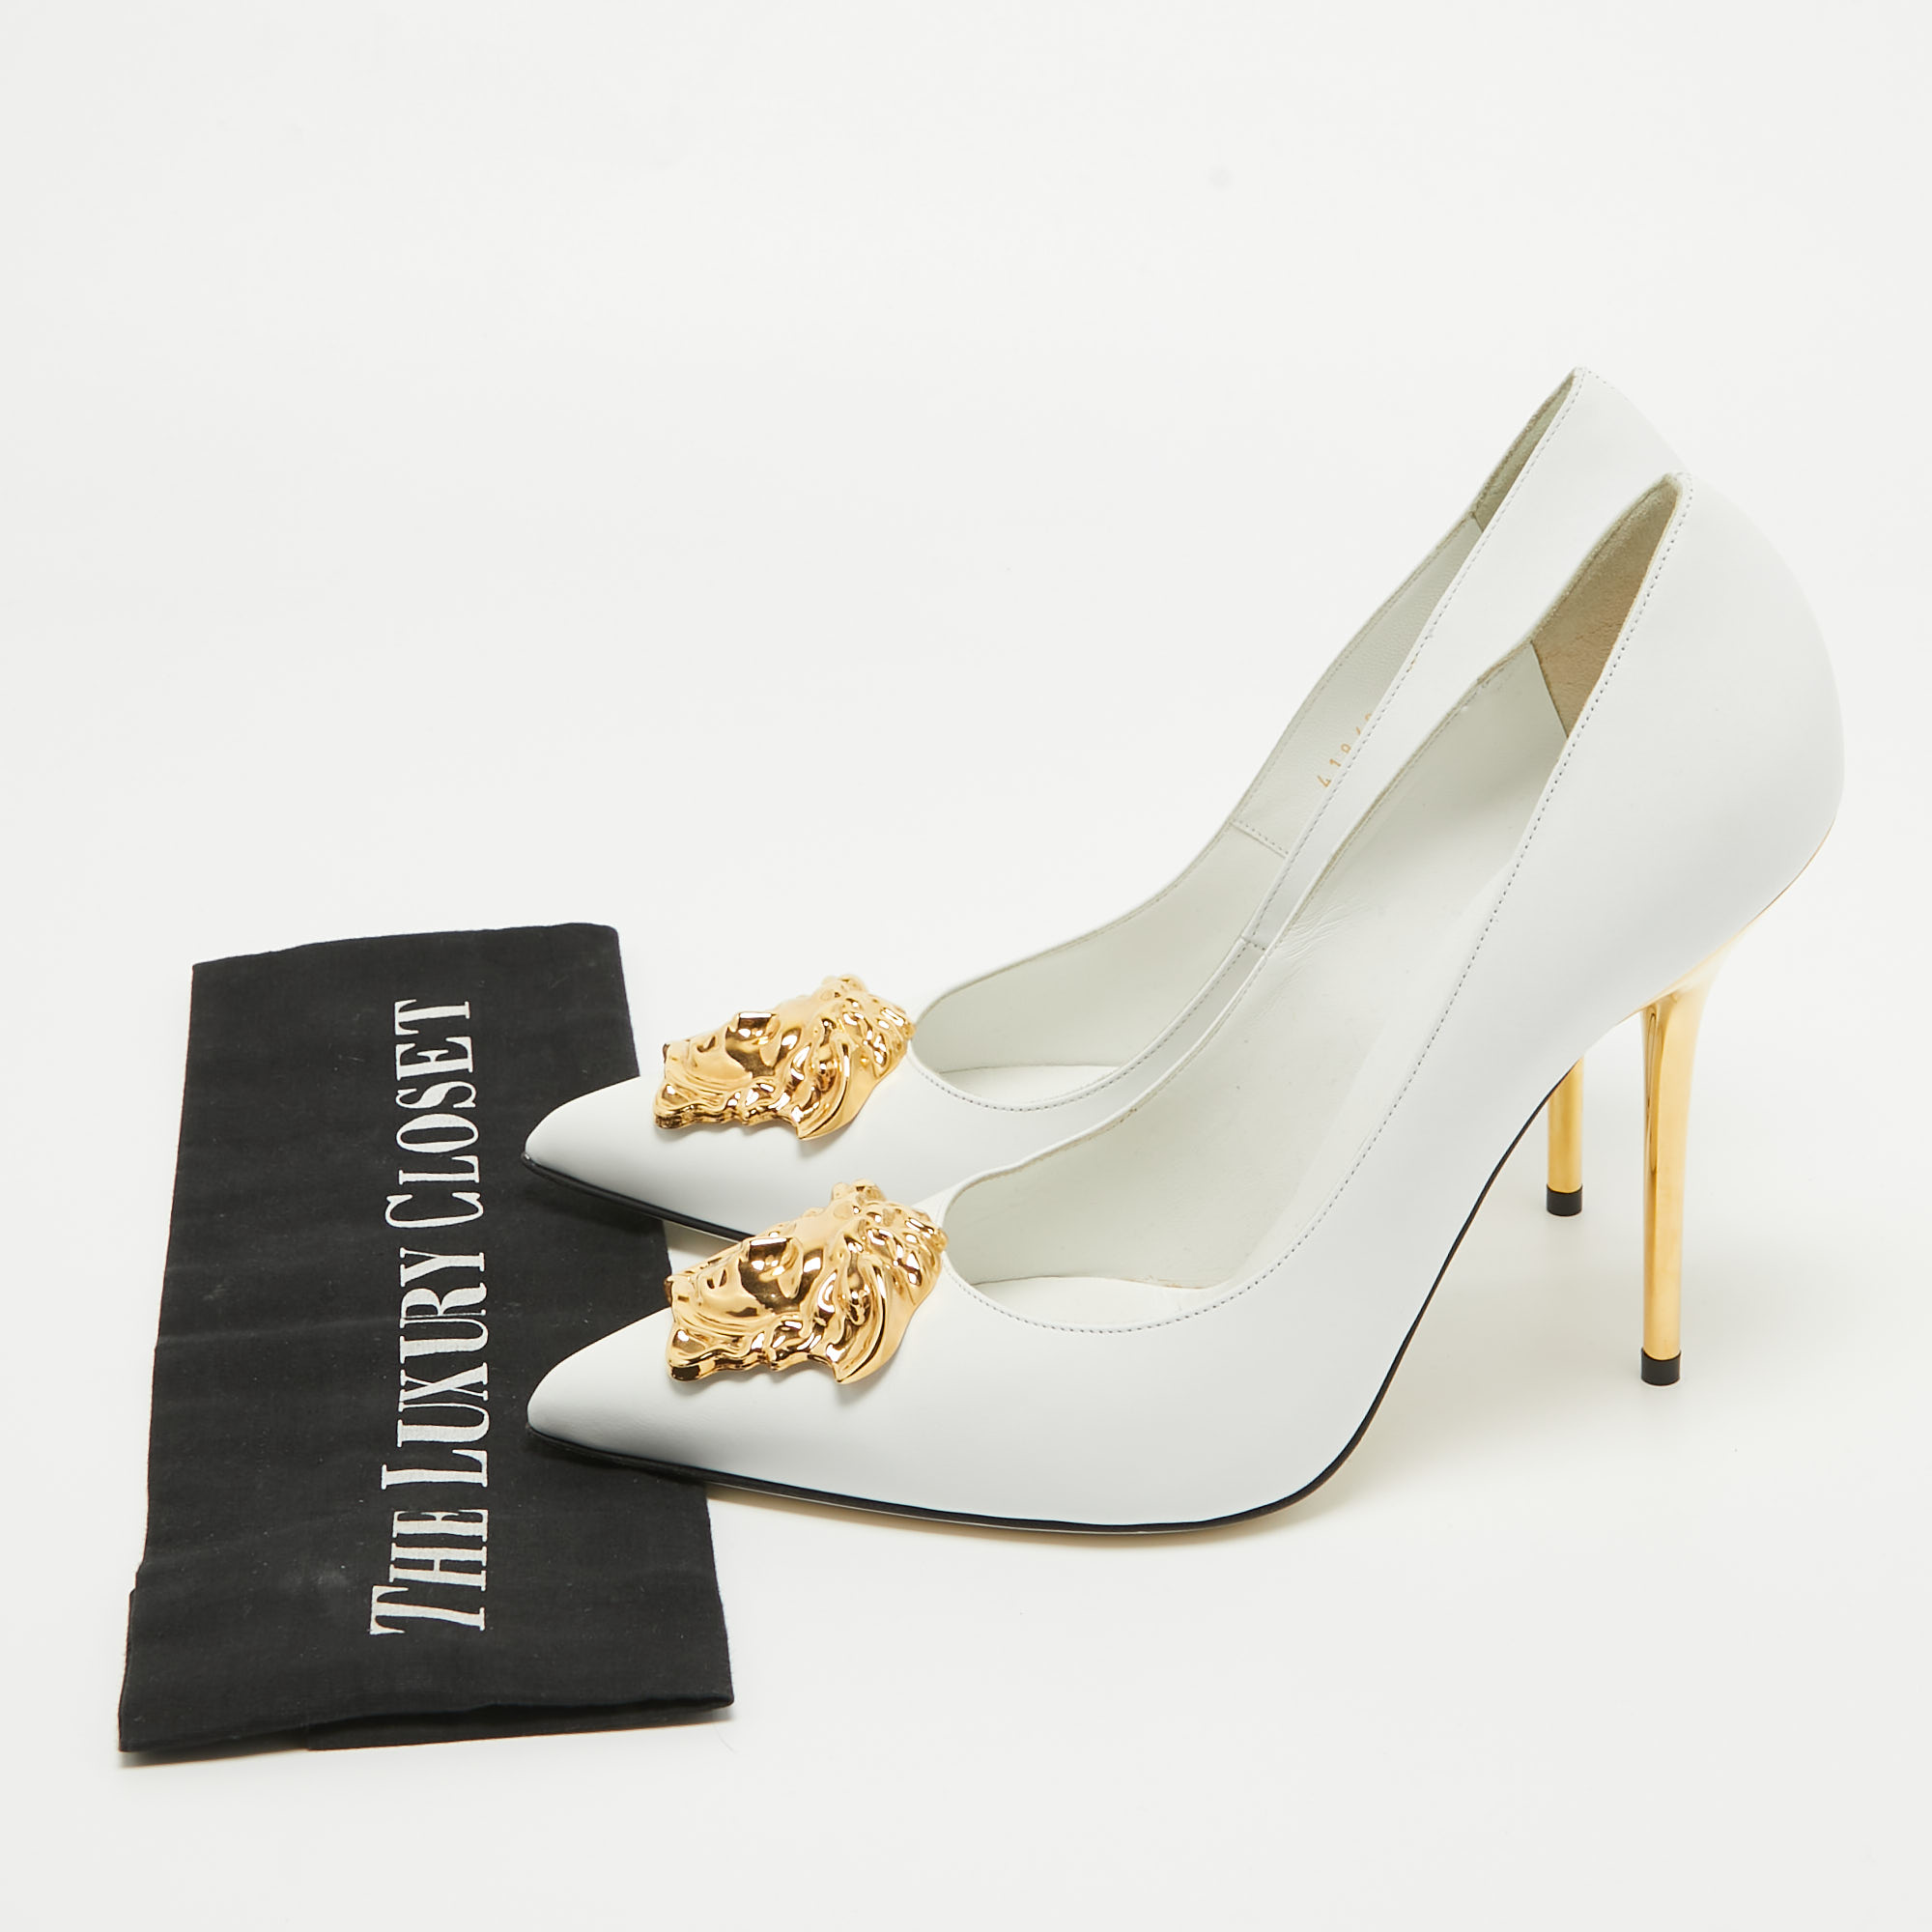 Versace White Leather Medusa Pointed Toe Pumps Size 40.5